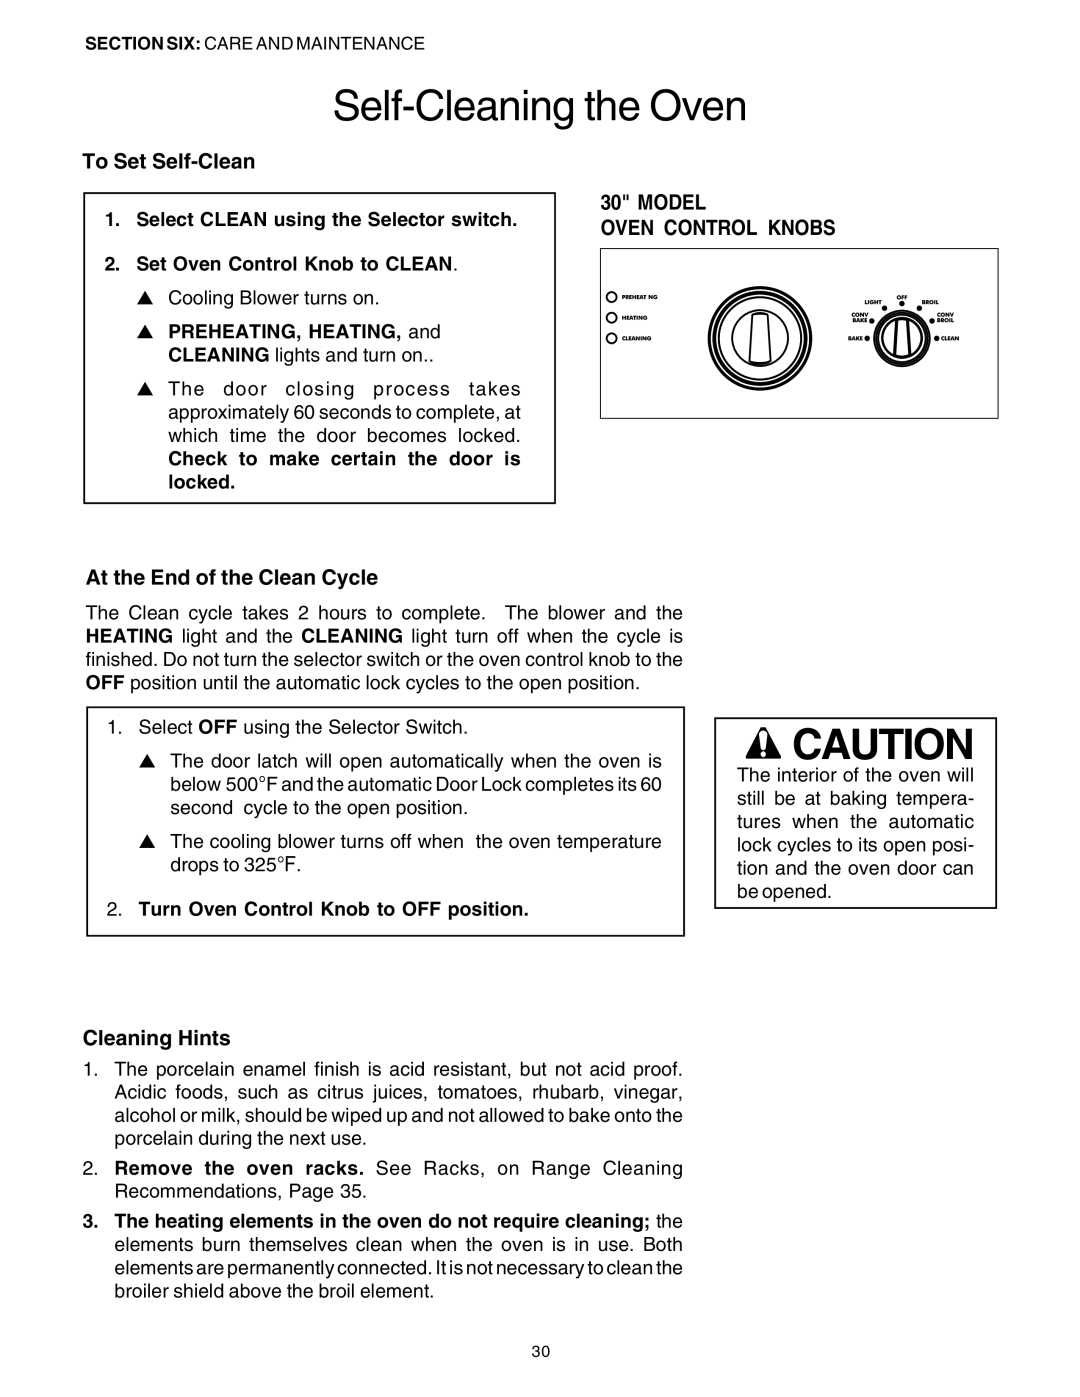 Thermador DP30 manual To Set Self-Clean, Model Oven Control Knobs, At the End of the Clean Cycle, Cleaning Hints 